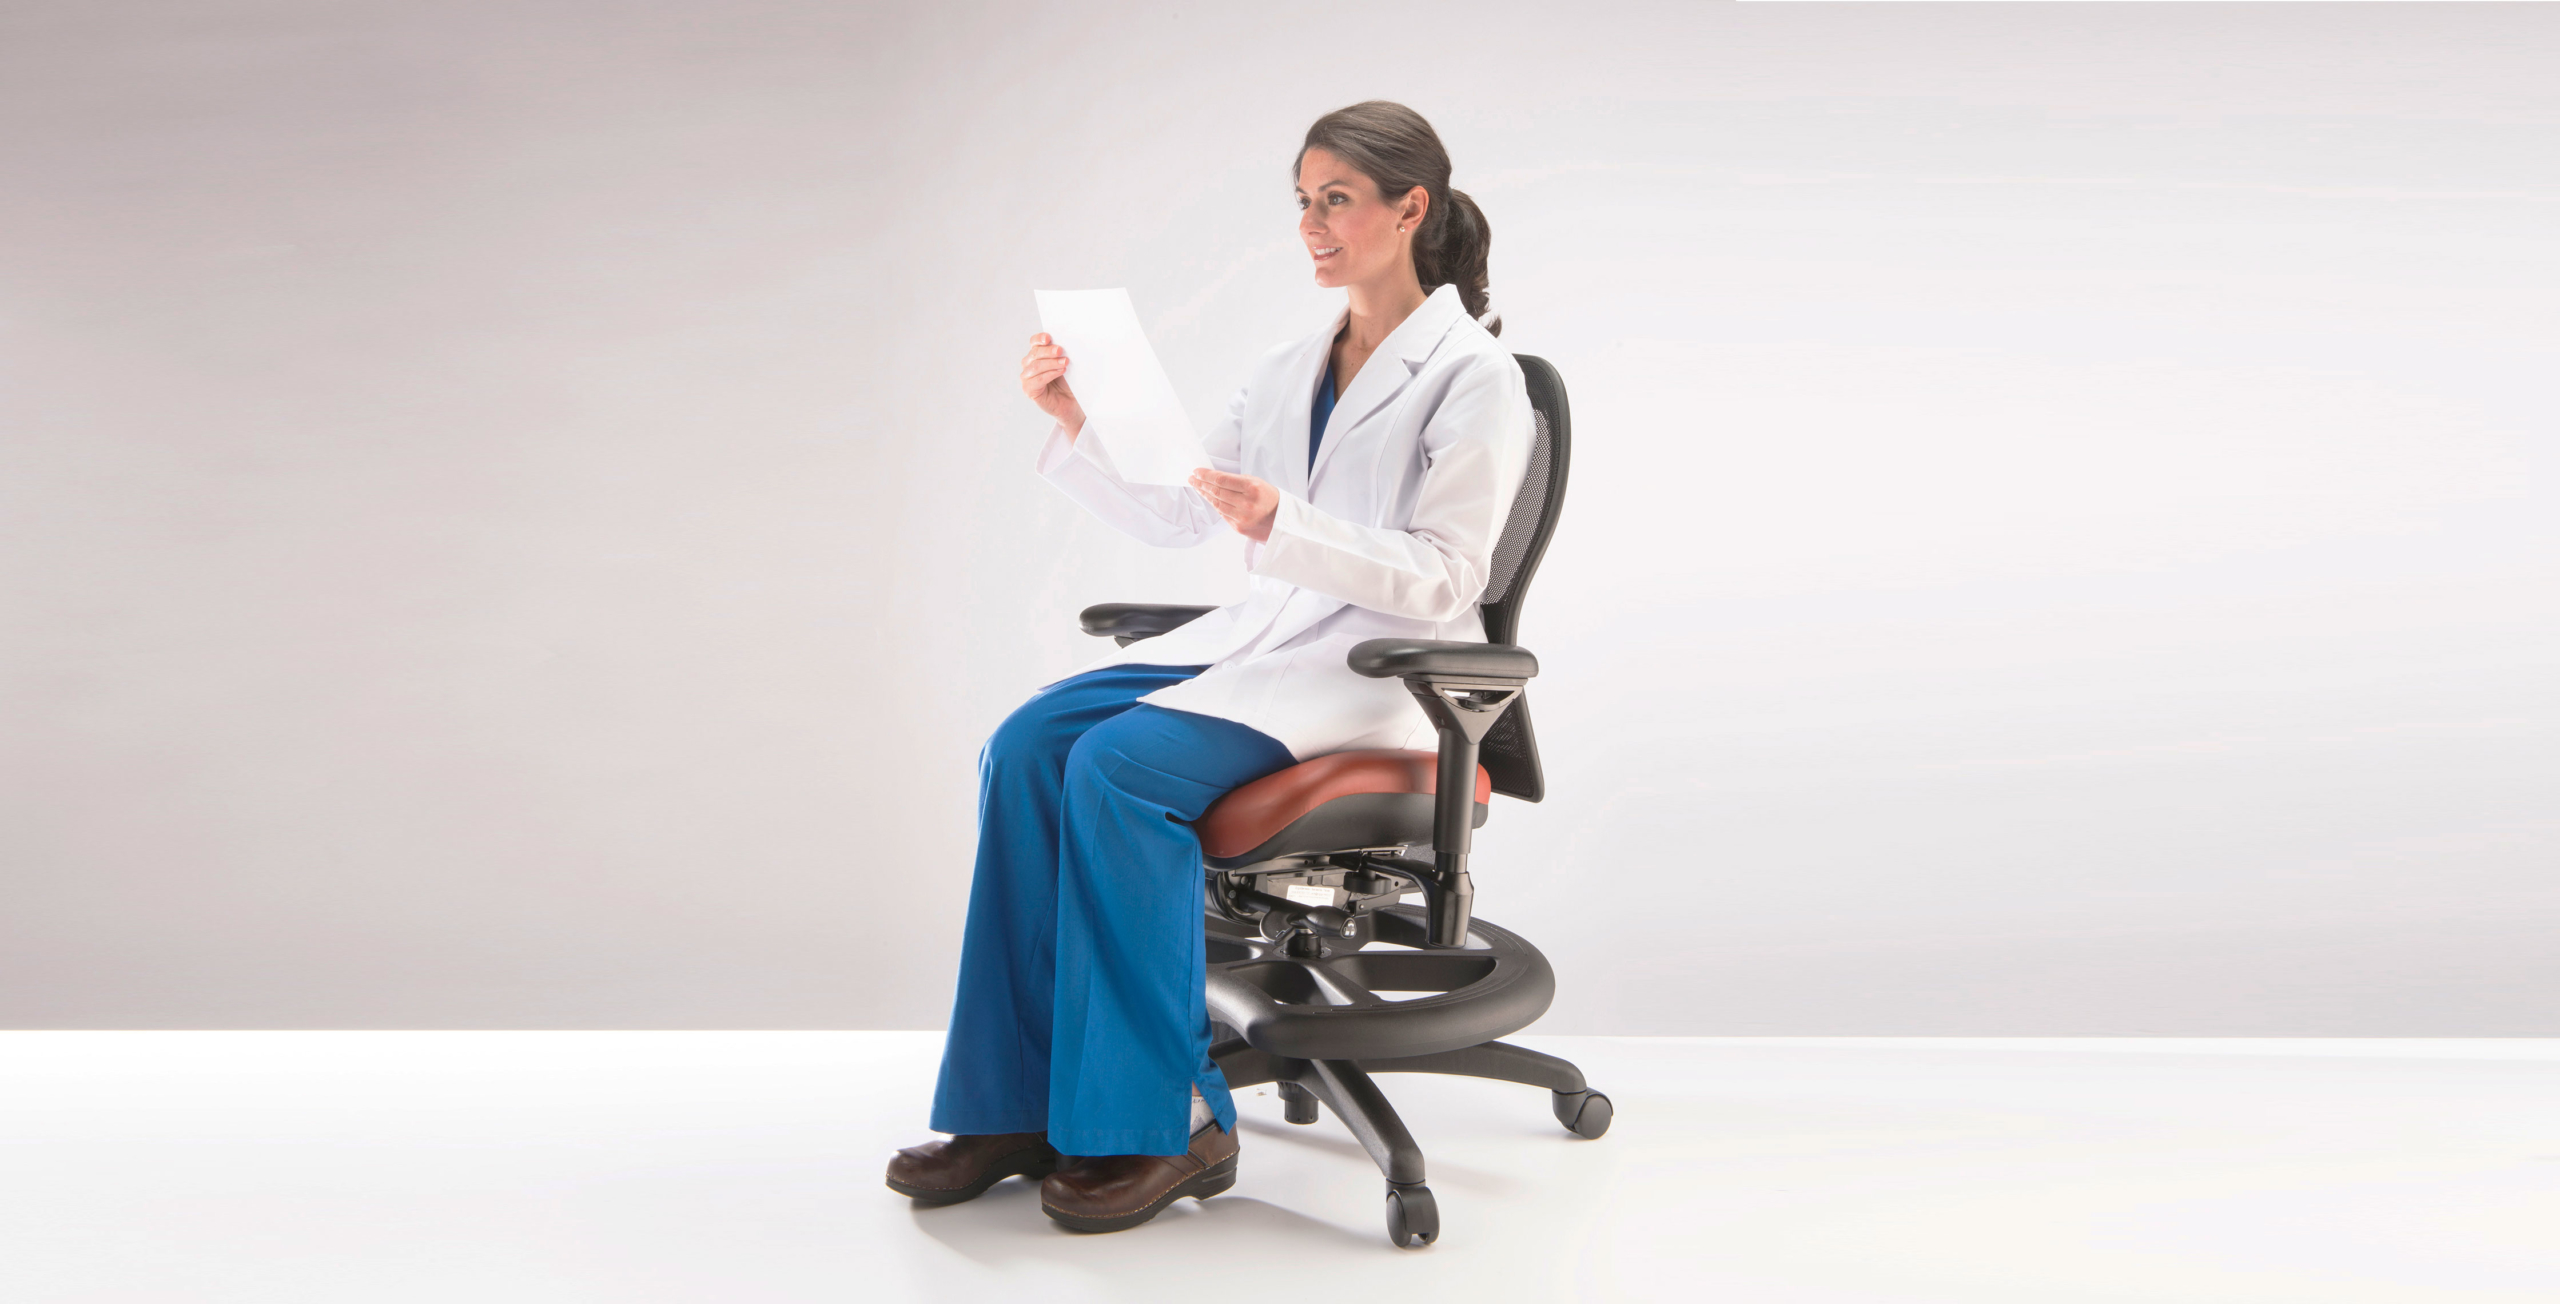 nurse sitting upright on chair to protect back at work